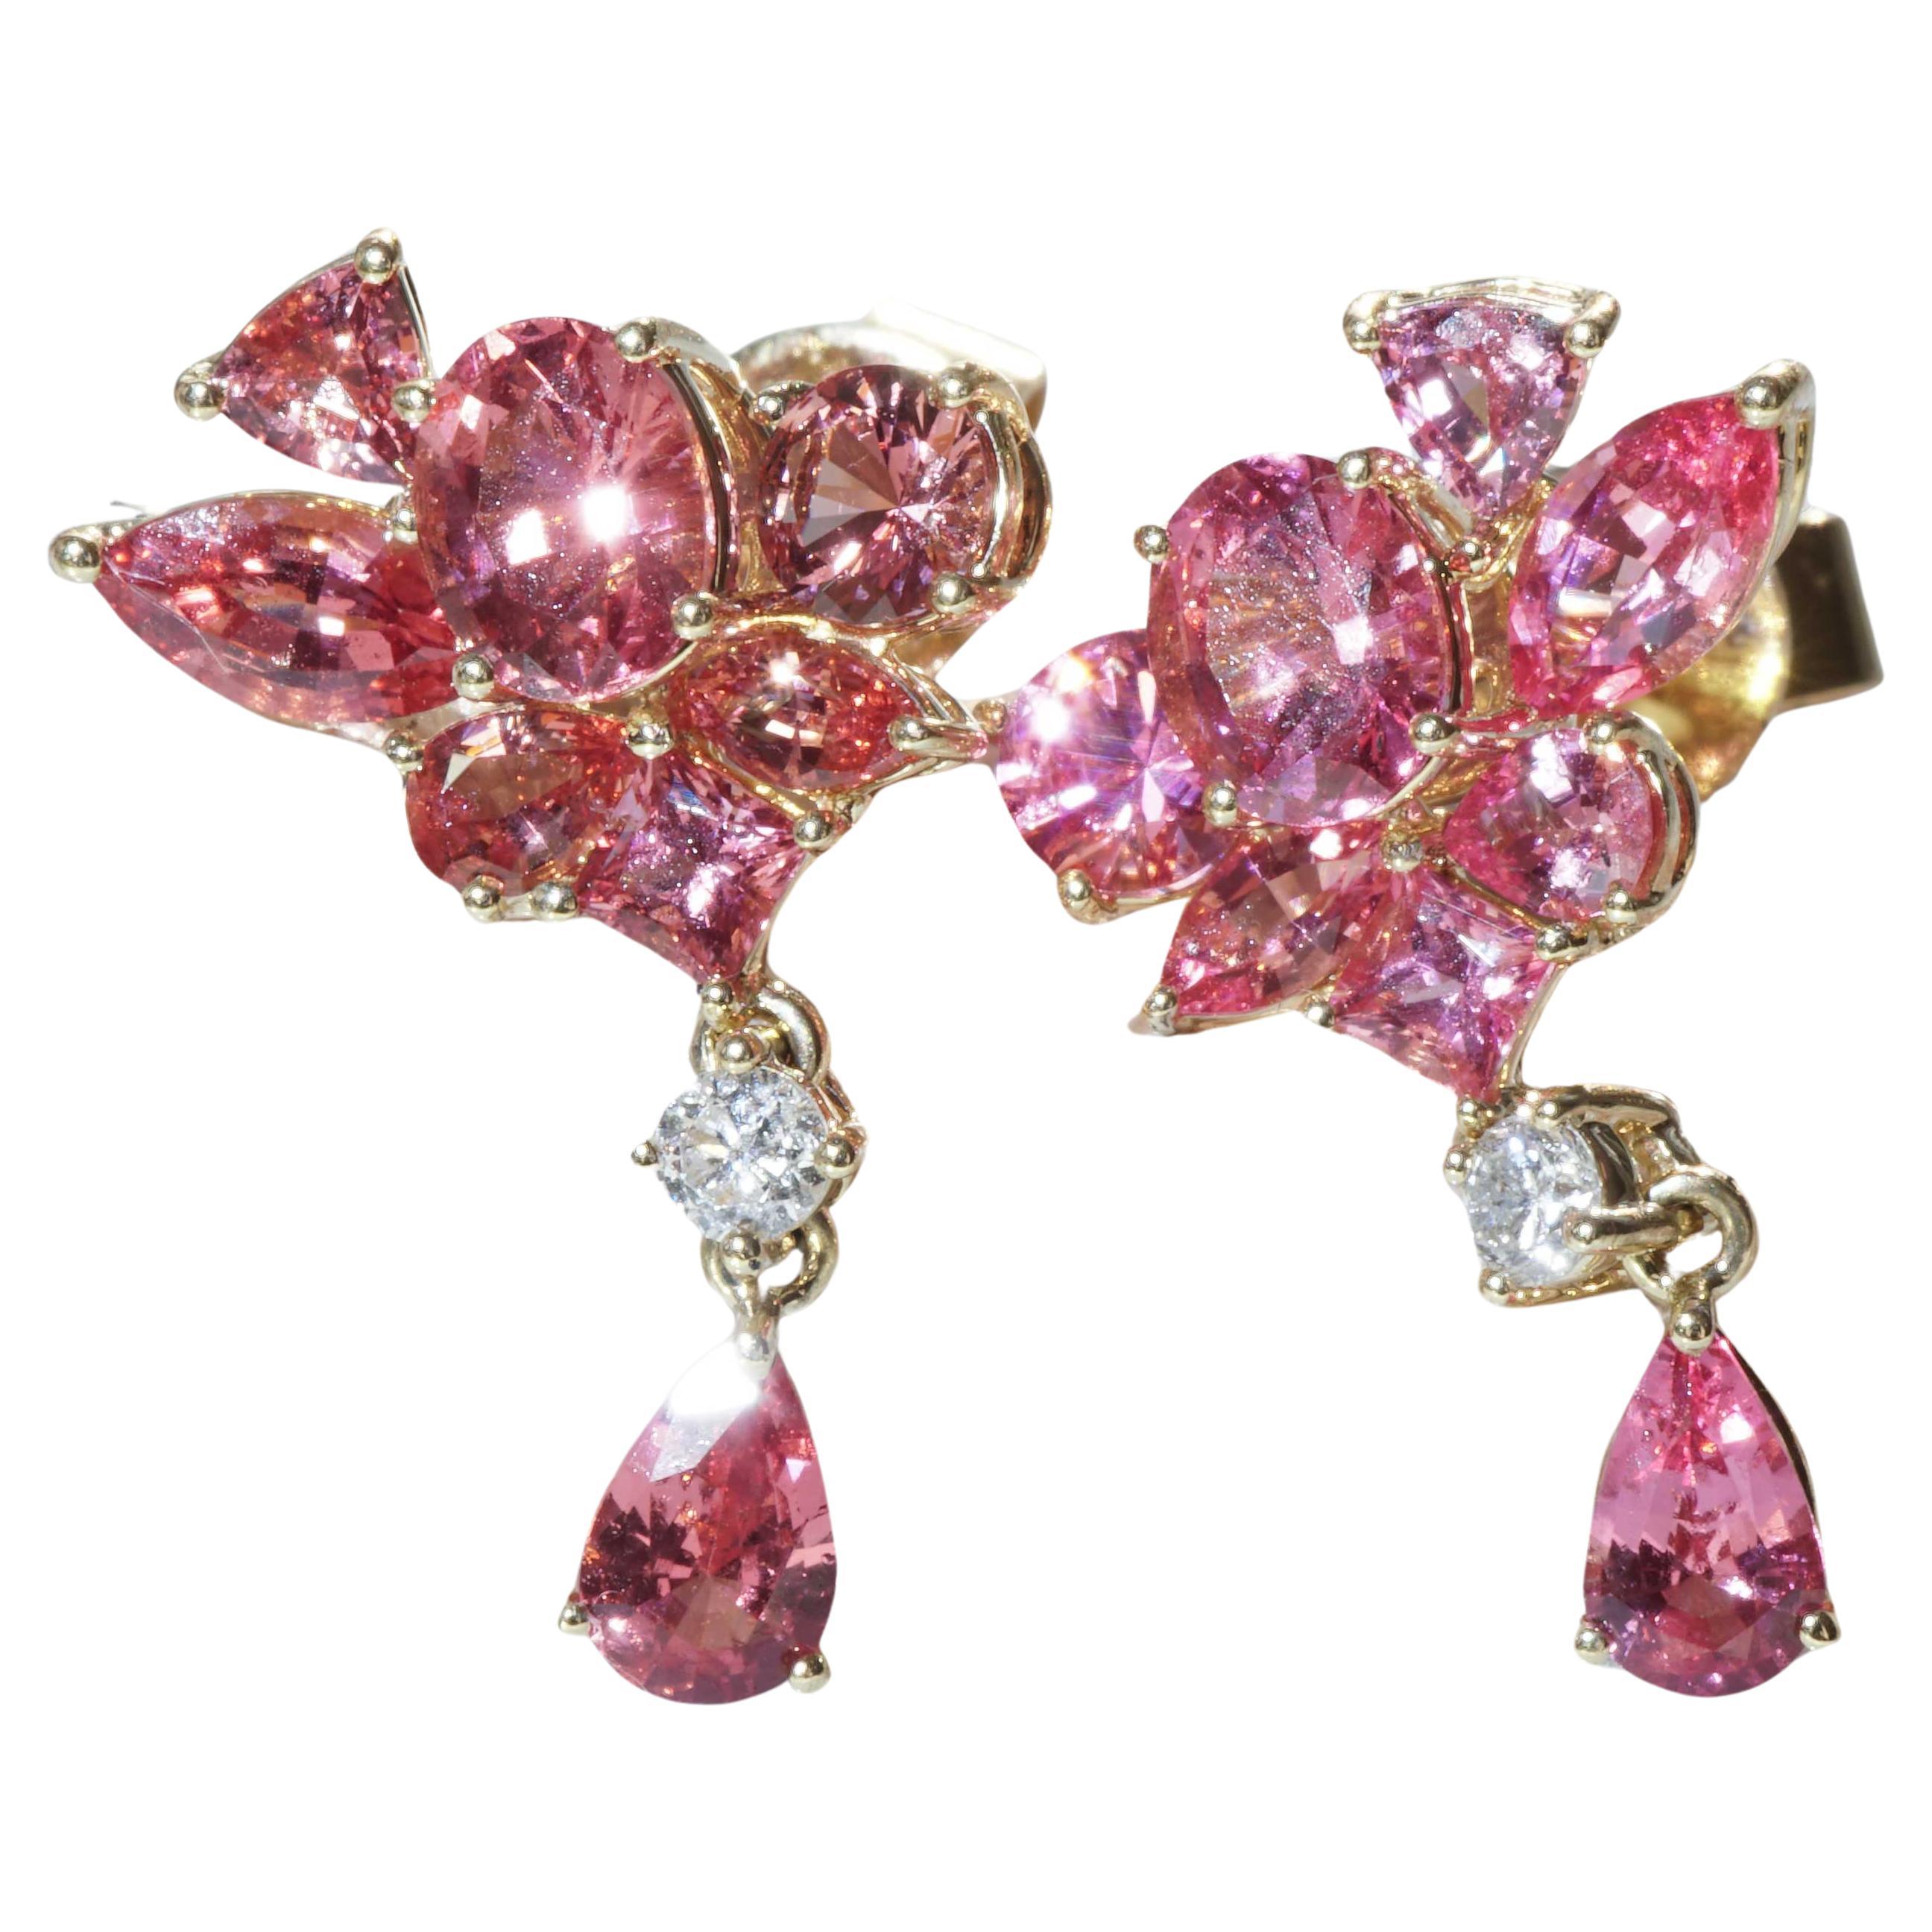 Mahenge Spinel Earrings overwhelming Colors 3.01 ct 0.11 ct artfully assembled For Sale